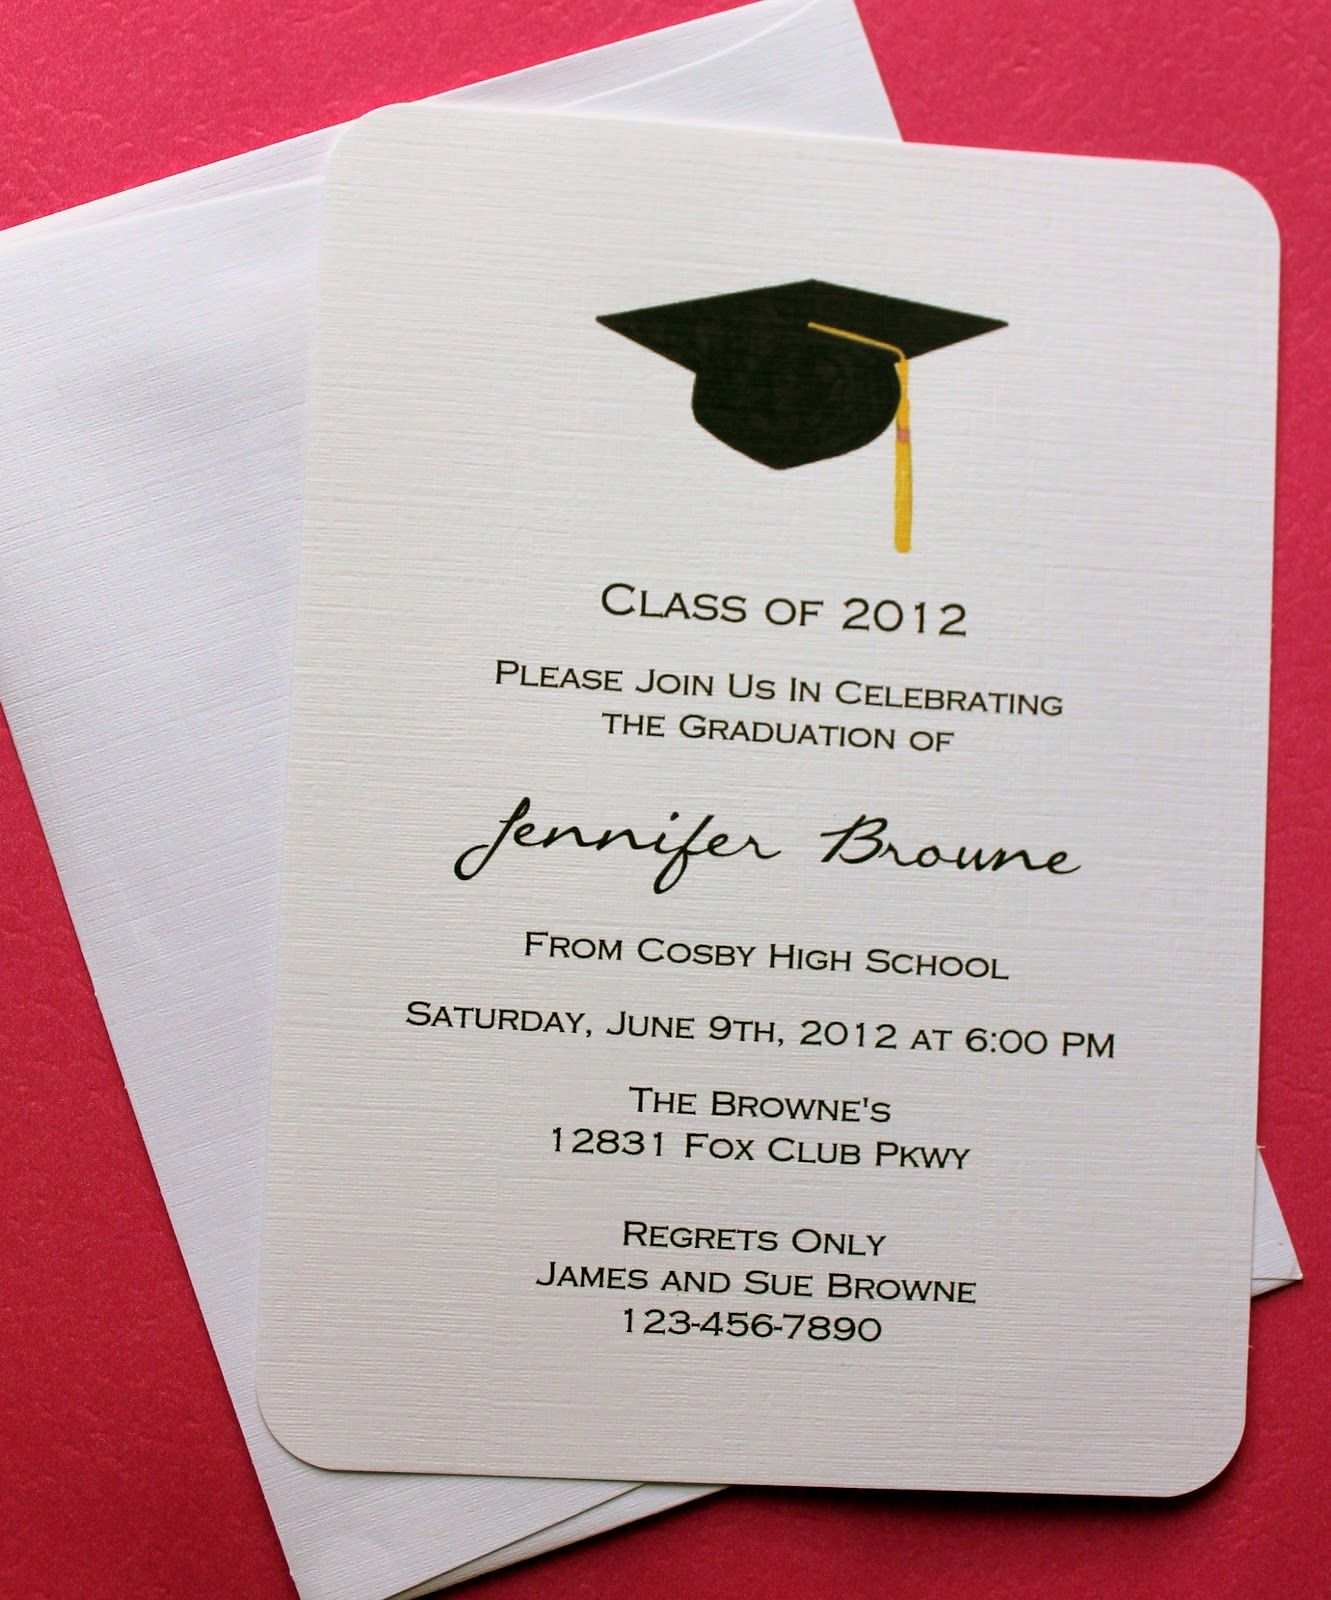 21 Adding Example Of Invitation Card For Graduation PSD File for Within Graduation Invitation Templates Microsoft Word